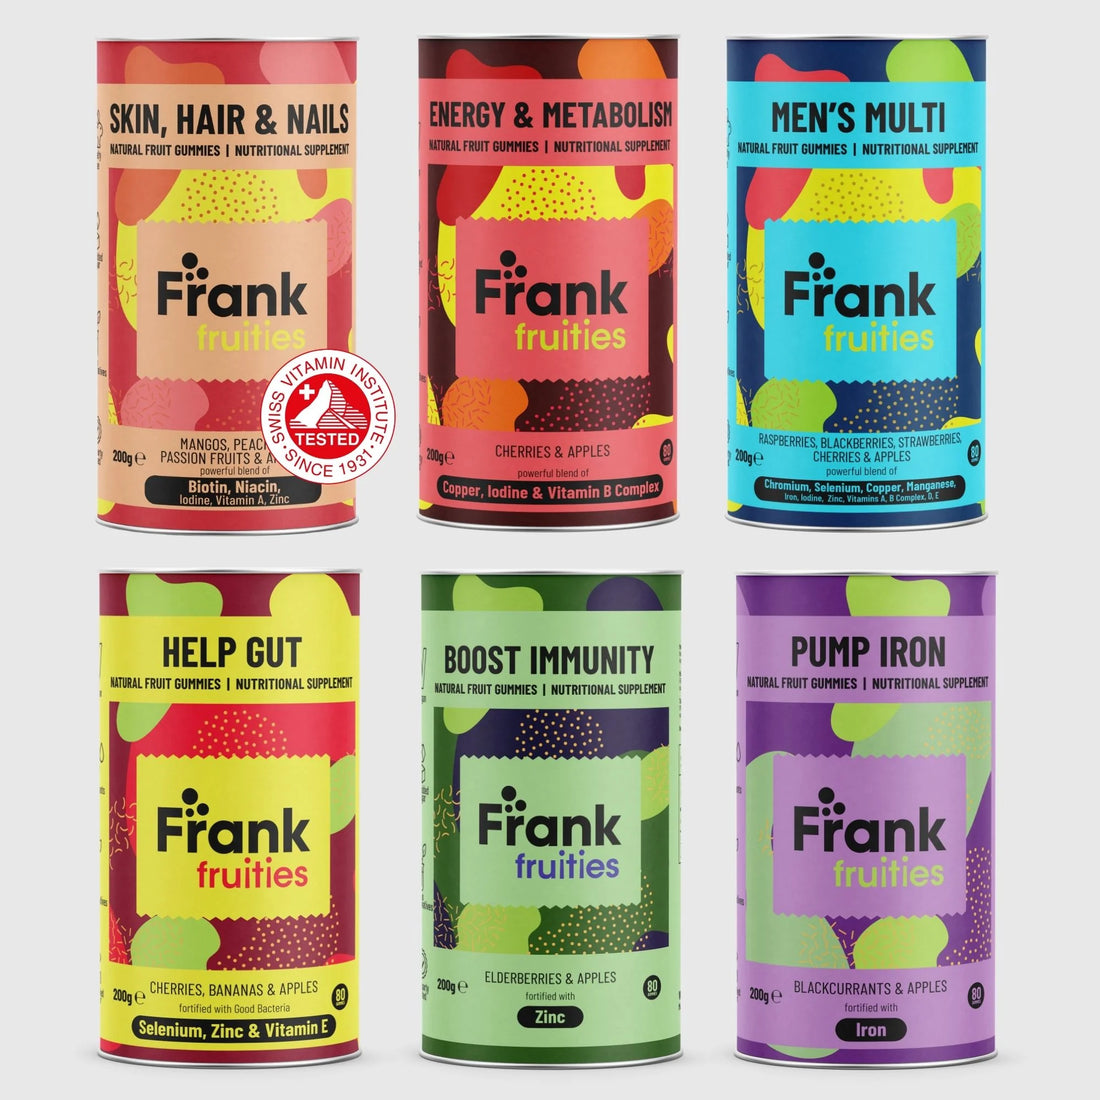 Frank fruities 6-PACK DISCOVERY KIT